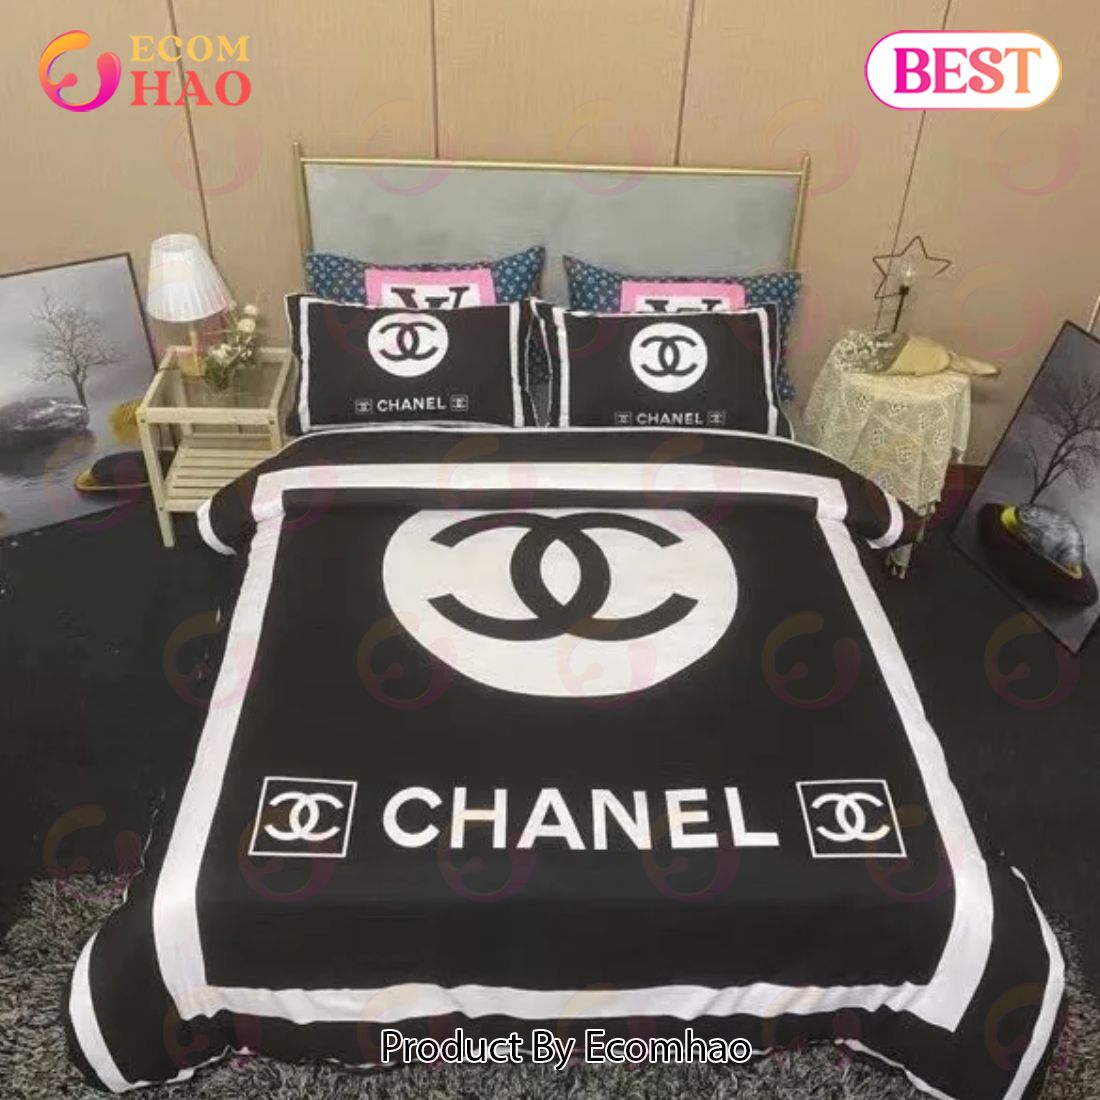 Chanel Black And White Printed Bedding Sets Quilt Sets Duvet Cover Luxury Brand Bedding Decor Bedroom Sets Best Luxury Bed Sets Gift Thankgivings And Christmas